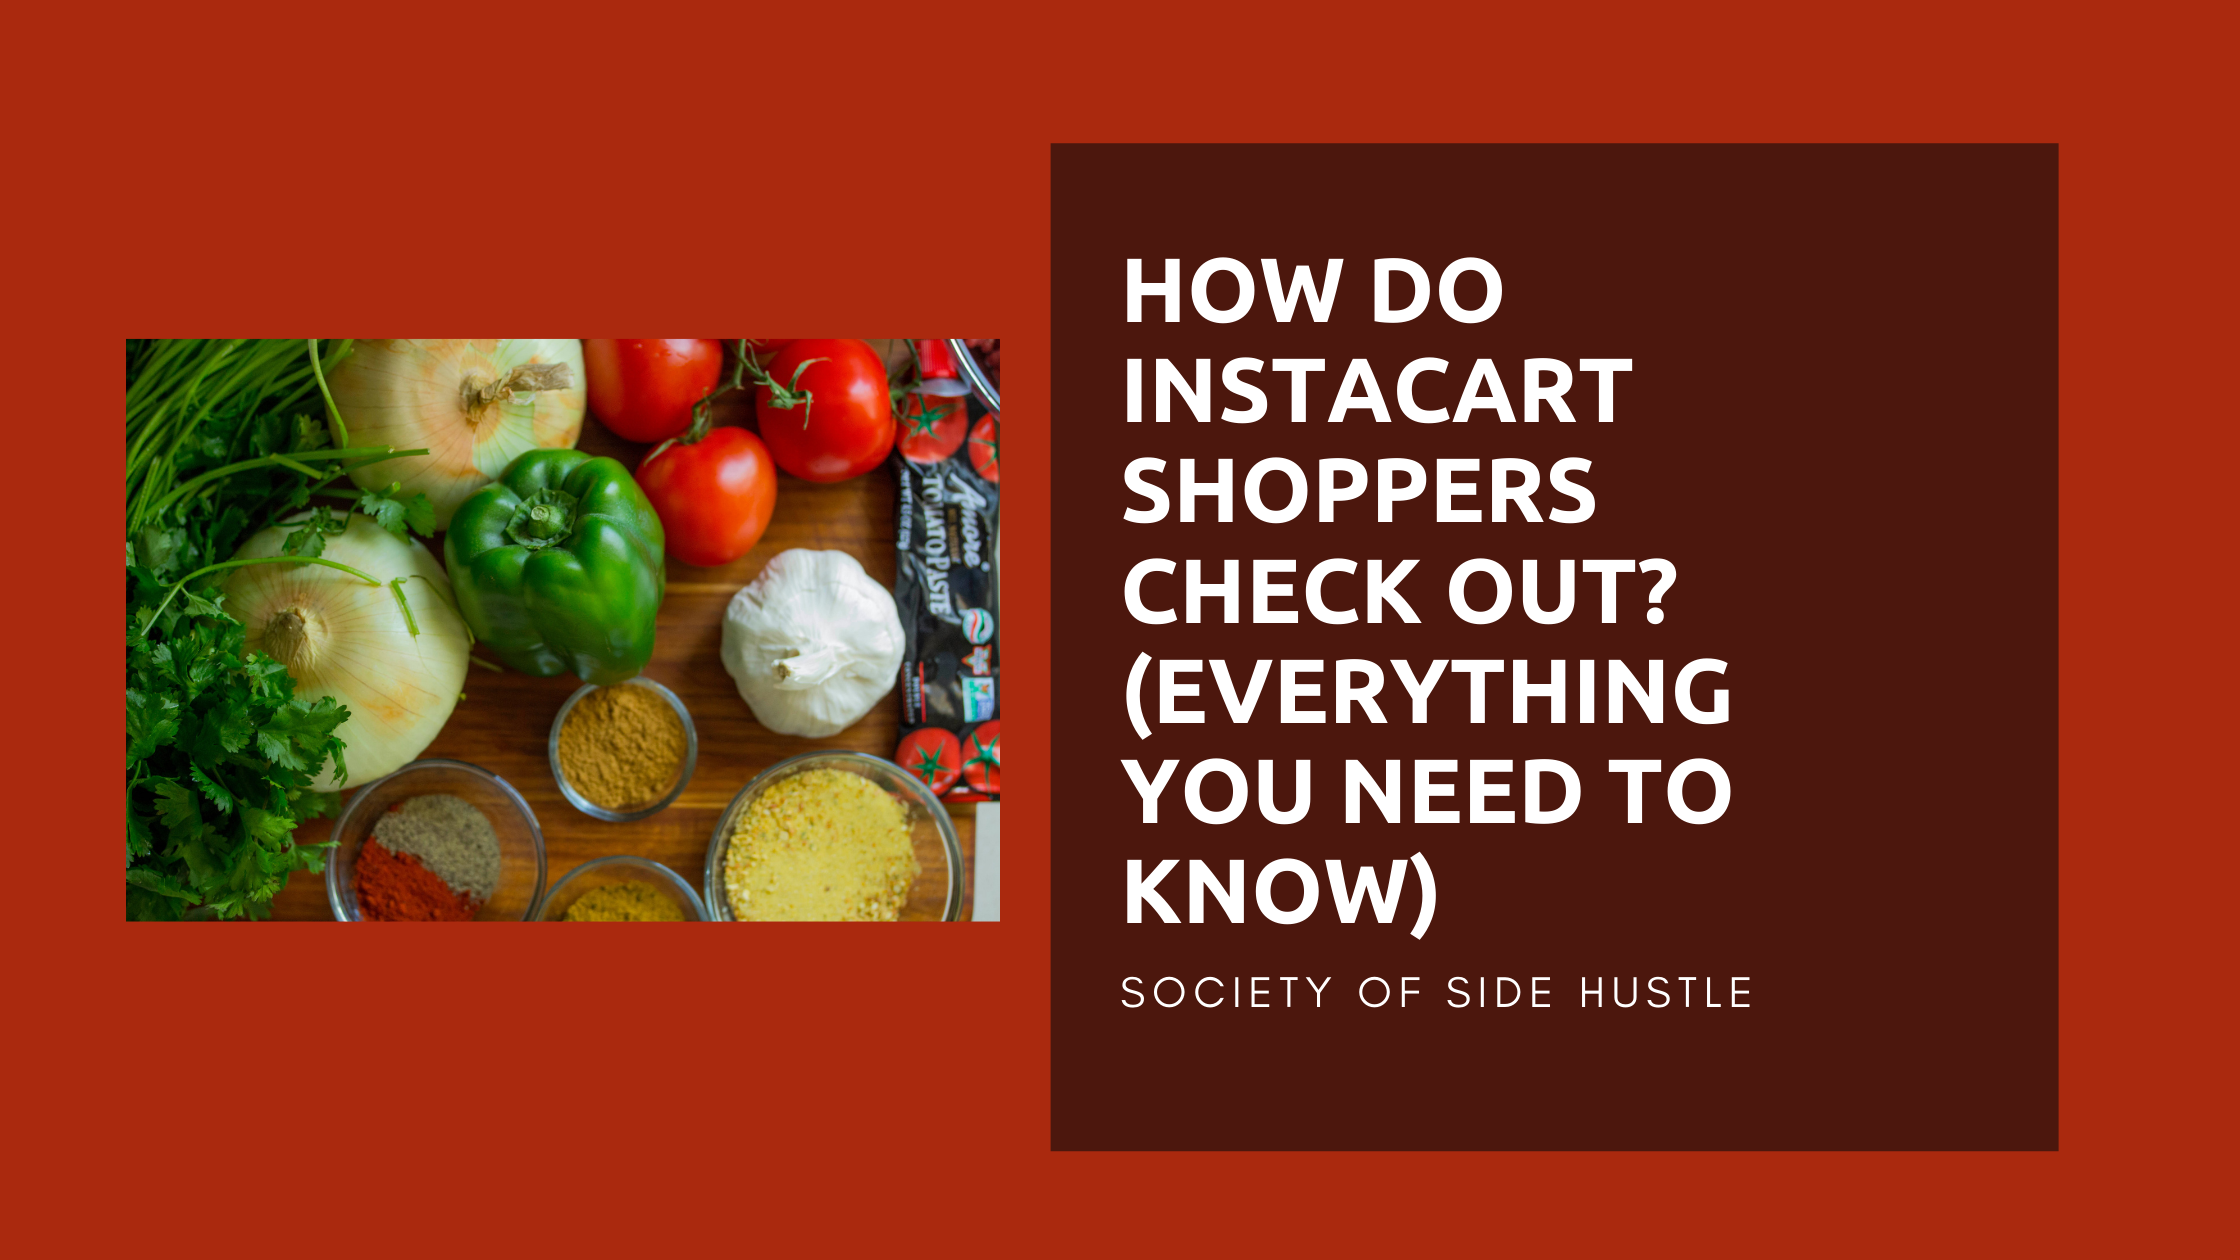 How Do Instacart Shoppers Check Out?(Everything You Need To Know)